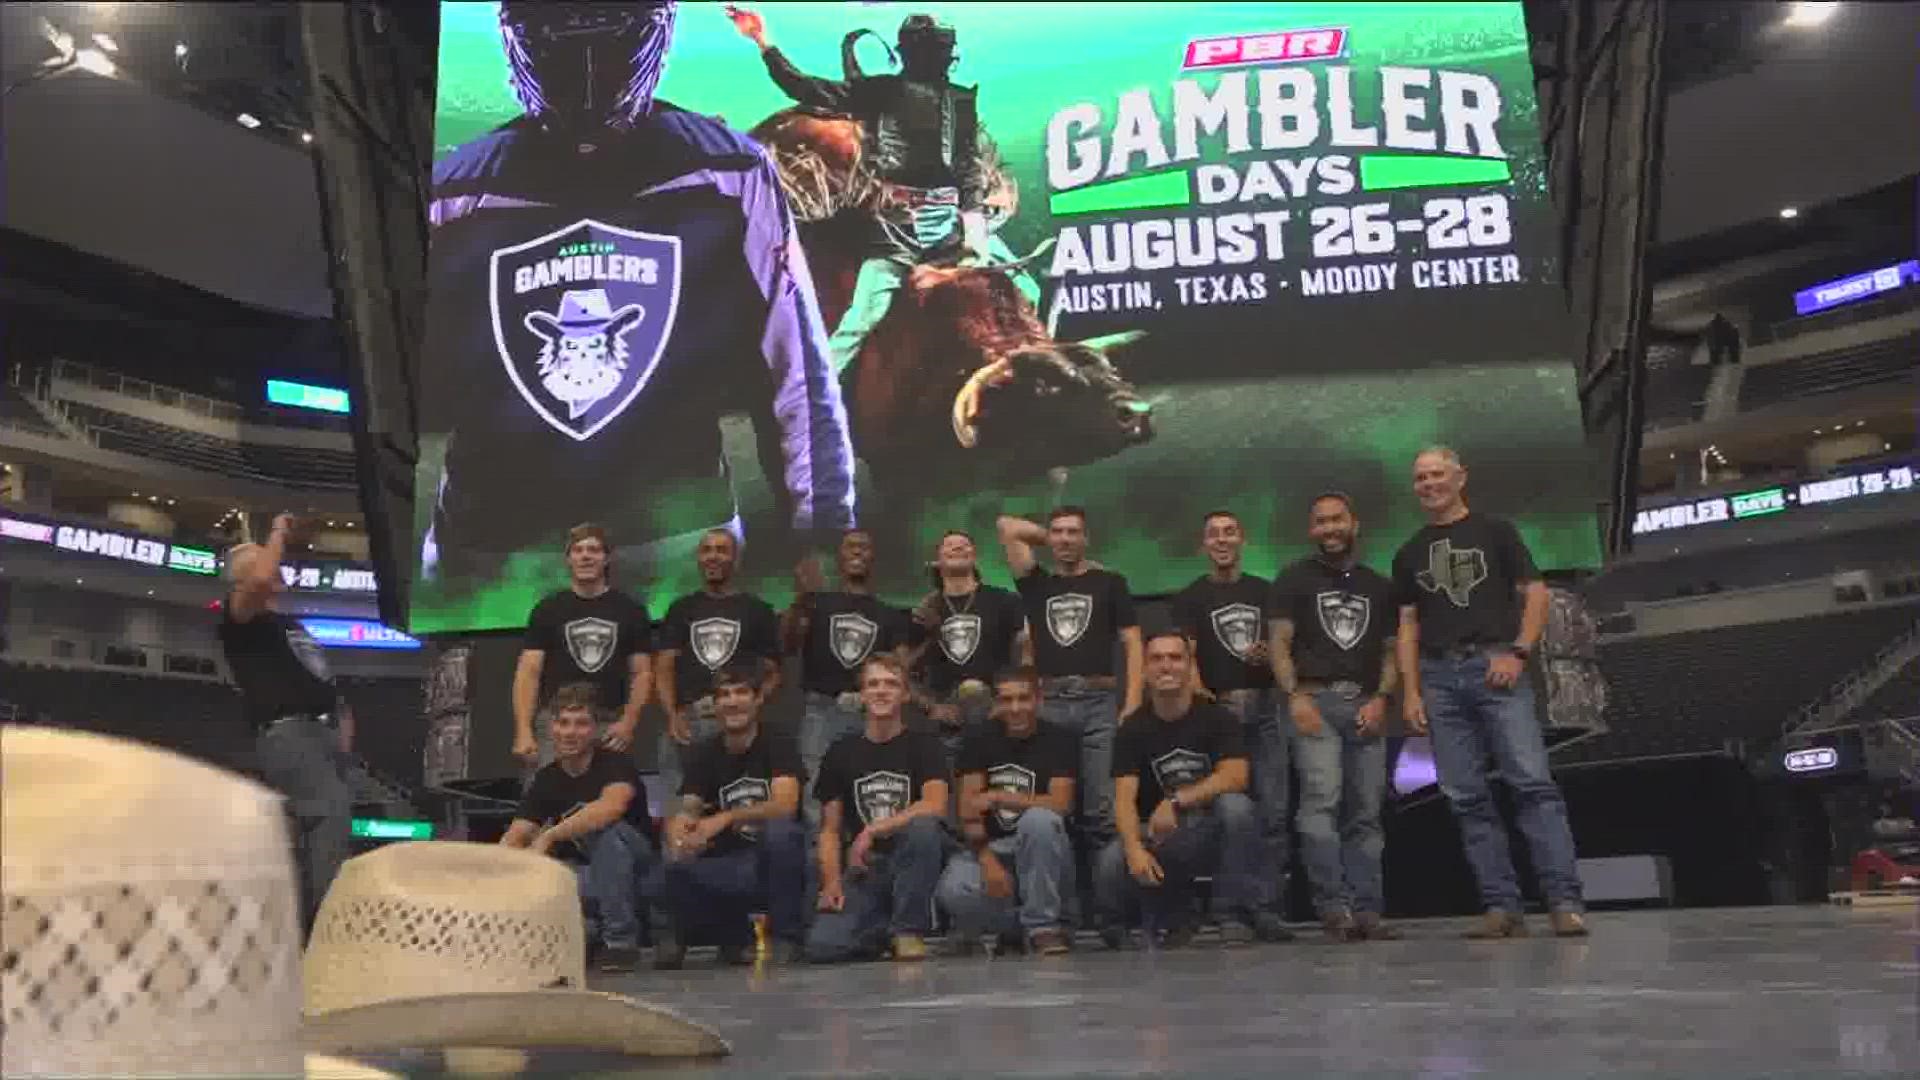 Bull riding fans are just days away from witnessing the Austin Gamblers' opening season.